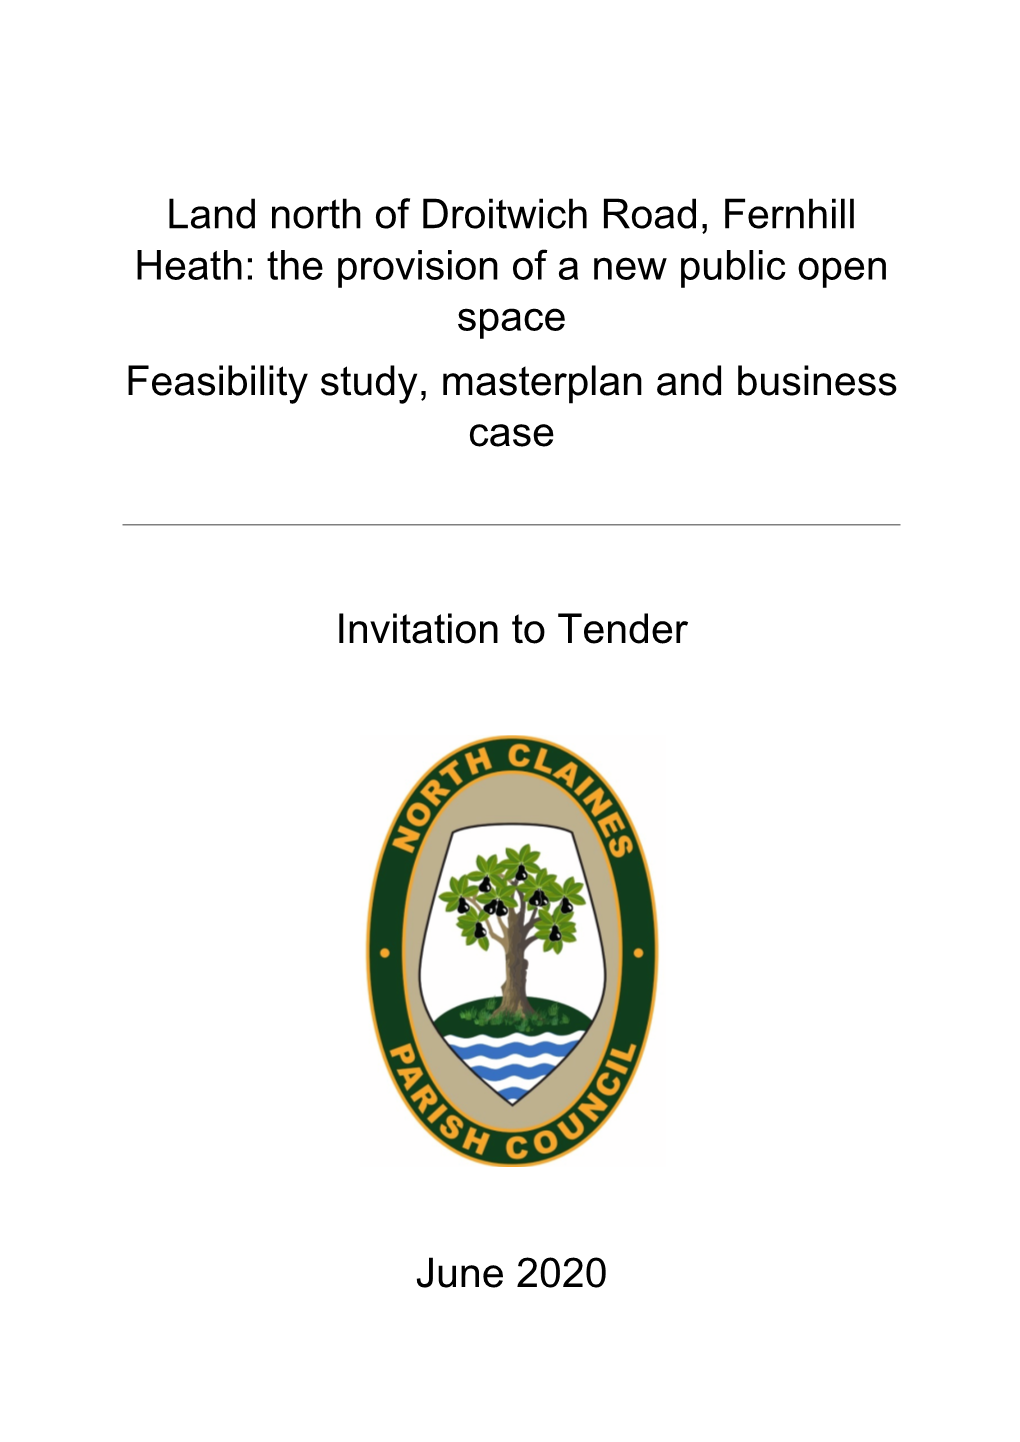 Land North of Droitwich Road, Fernhill Heath: the Provision of a New Public Open Space Feasibility Study, Masterplan and Business Case